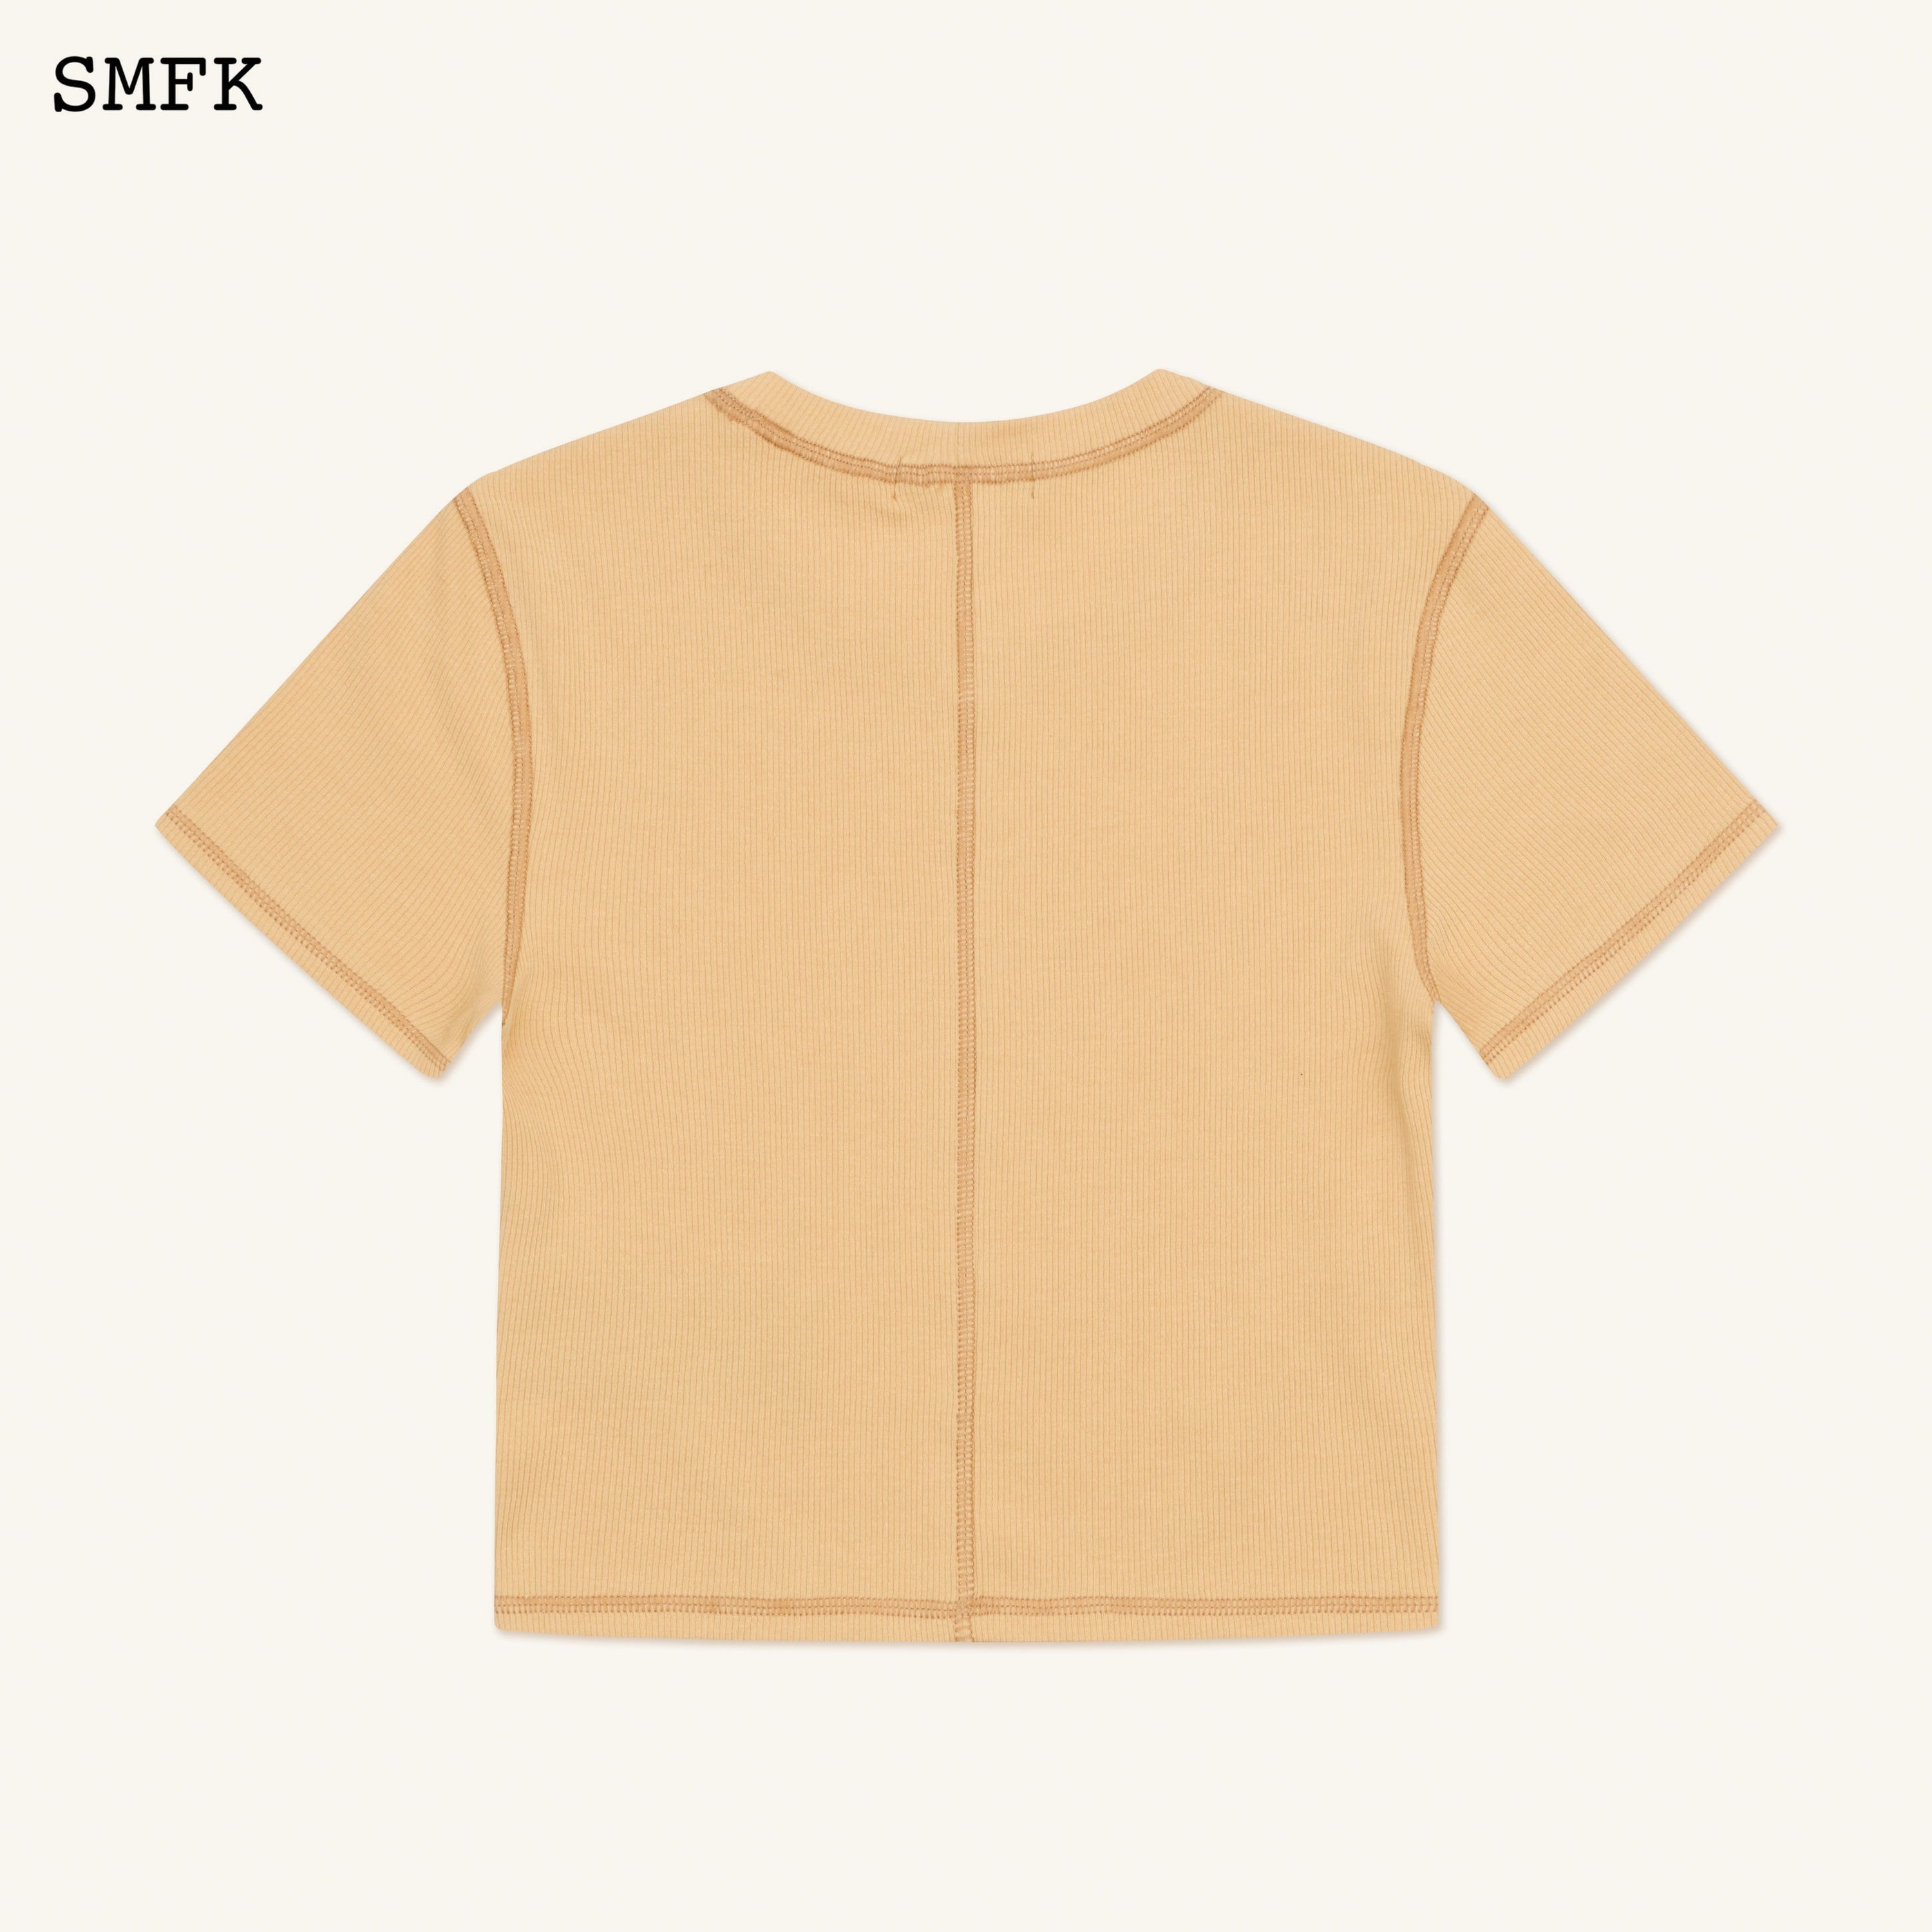 Compass Rush Slim-Fit Tee In Sand - SMFK Official